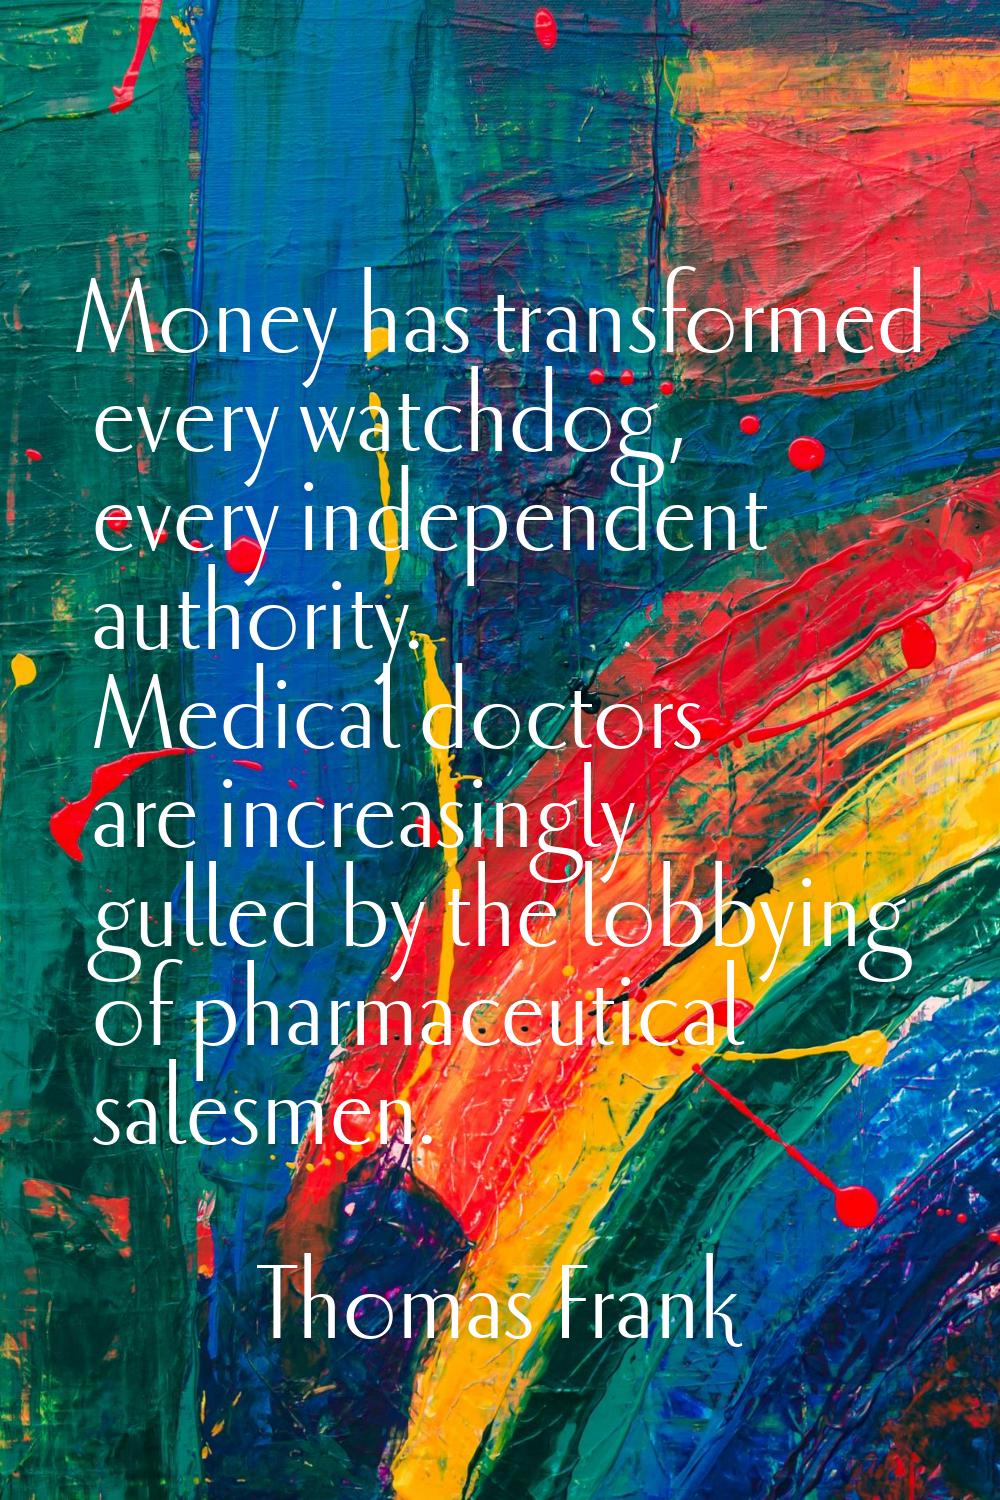 Money has transformed every watchdog, every independent authority. Medical doctors are increasingly